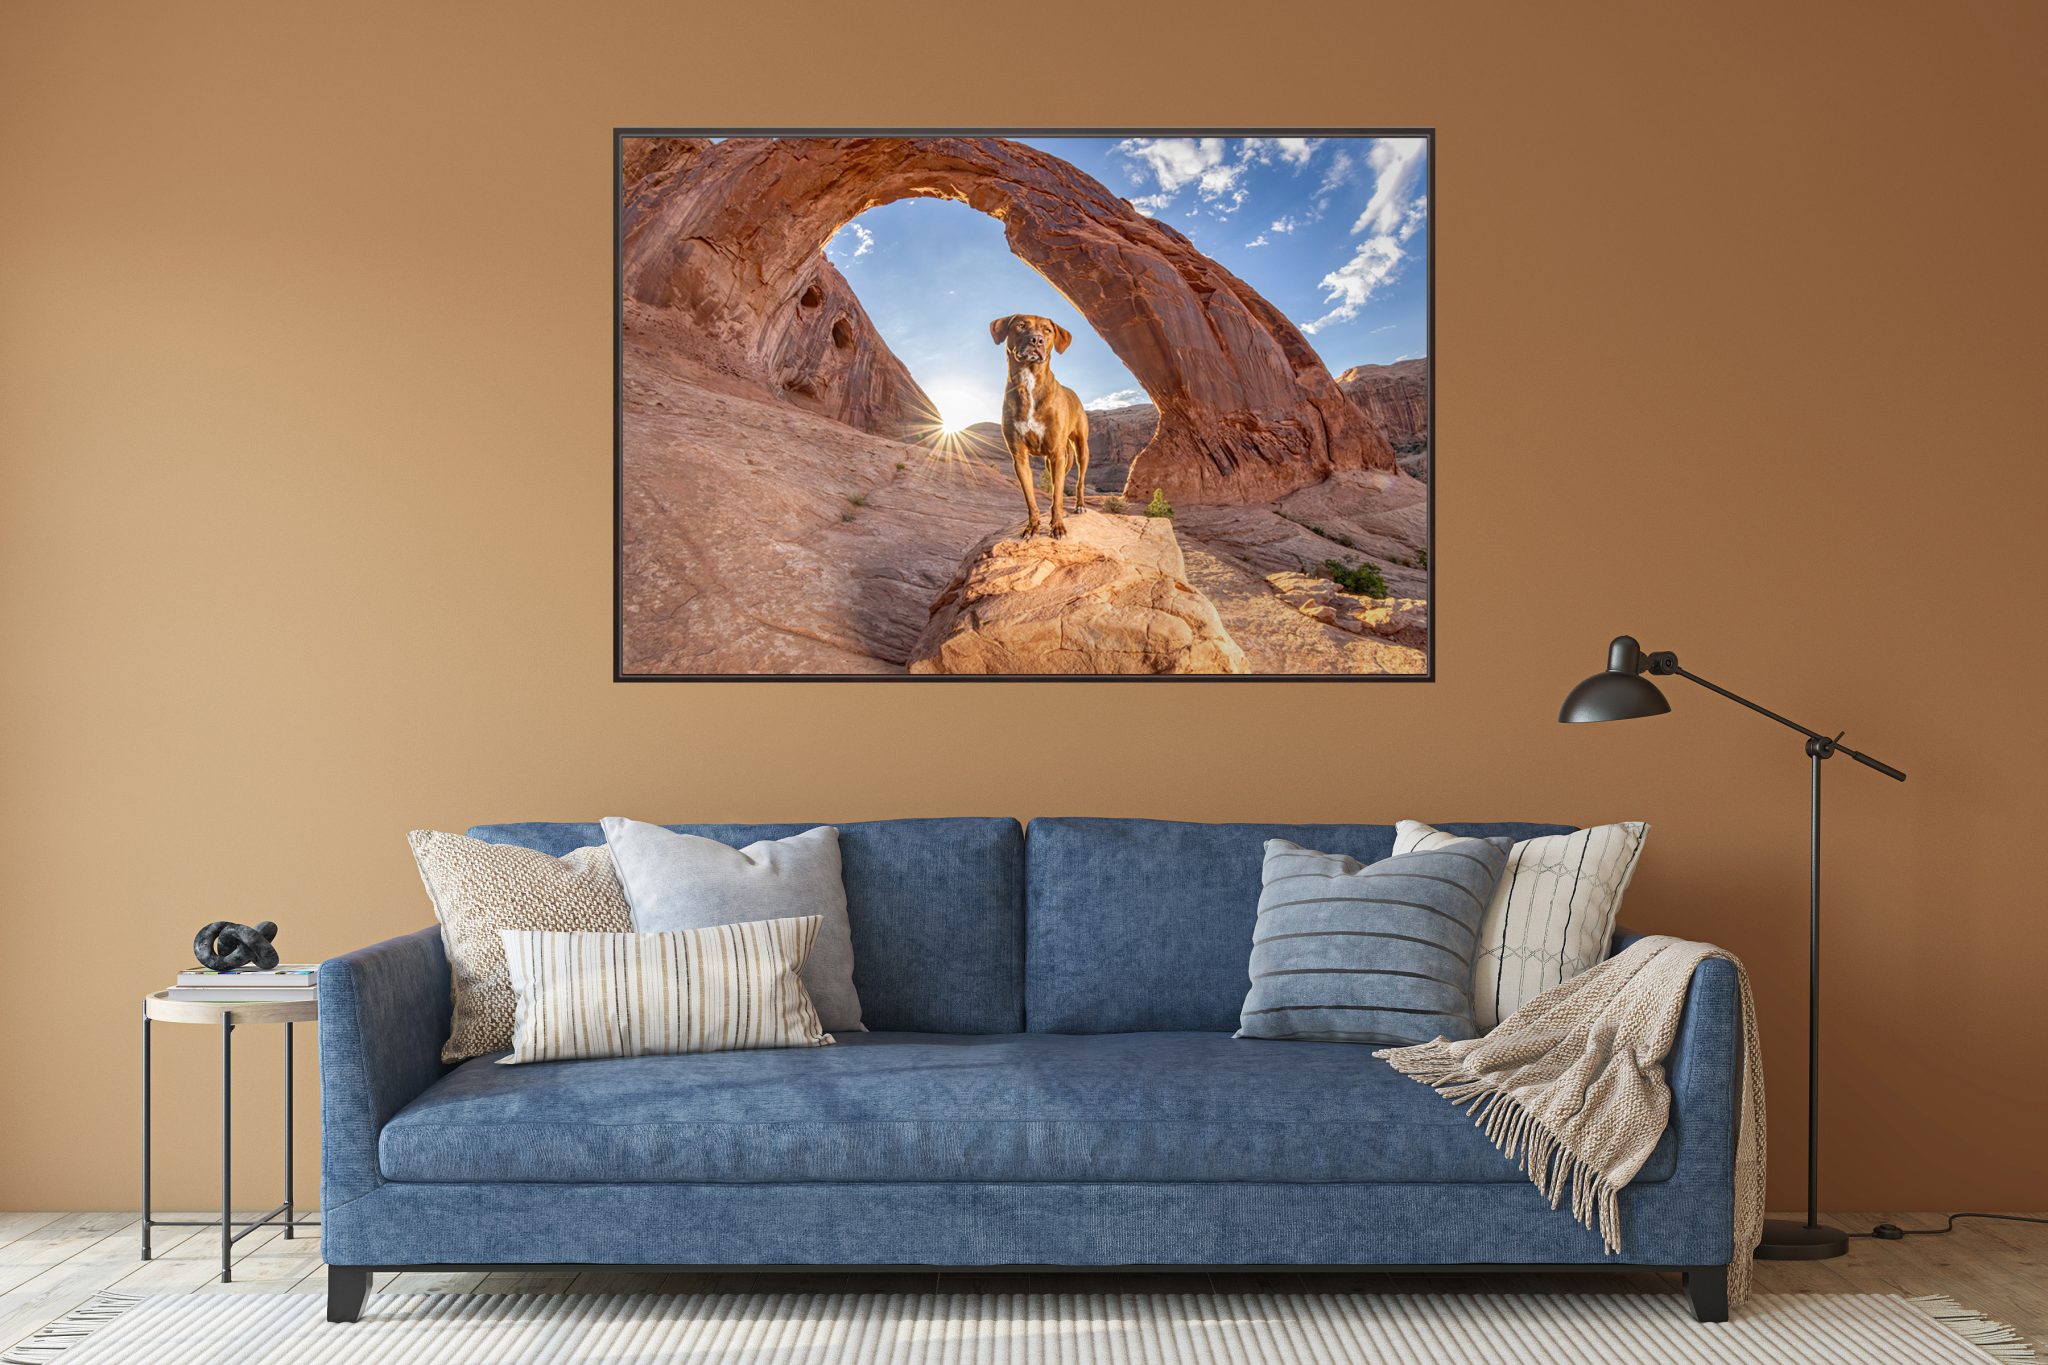 Statement Piece Portrait of Dog Guinness framed by Corona Arch near Moab, Utah in a brown living room over a blue sofa